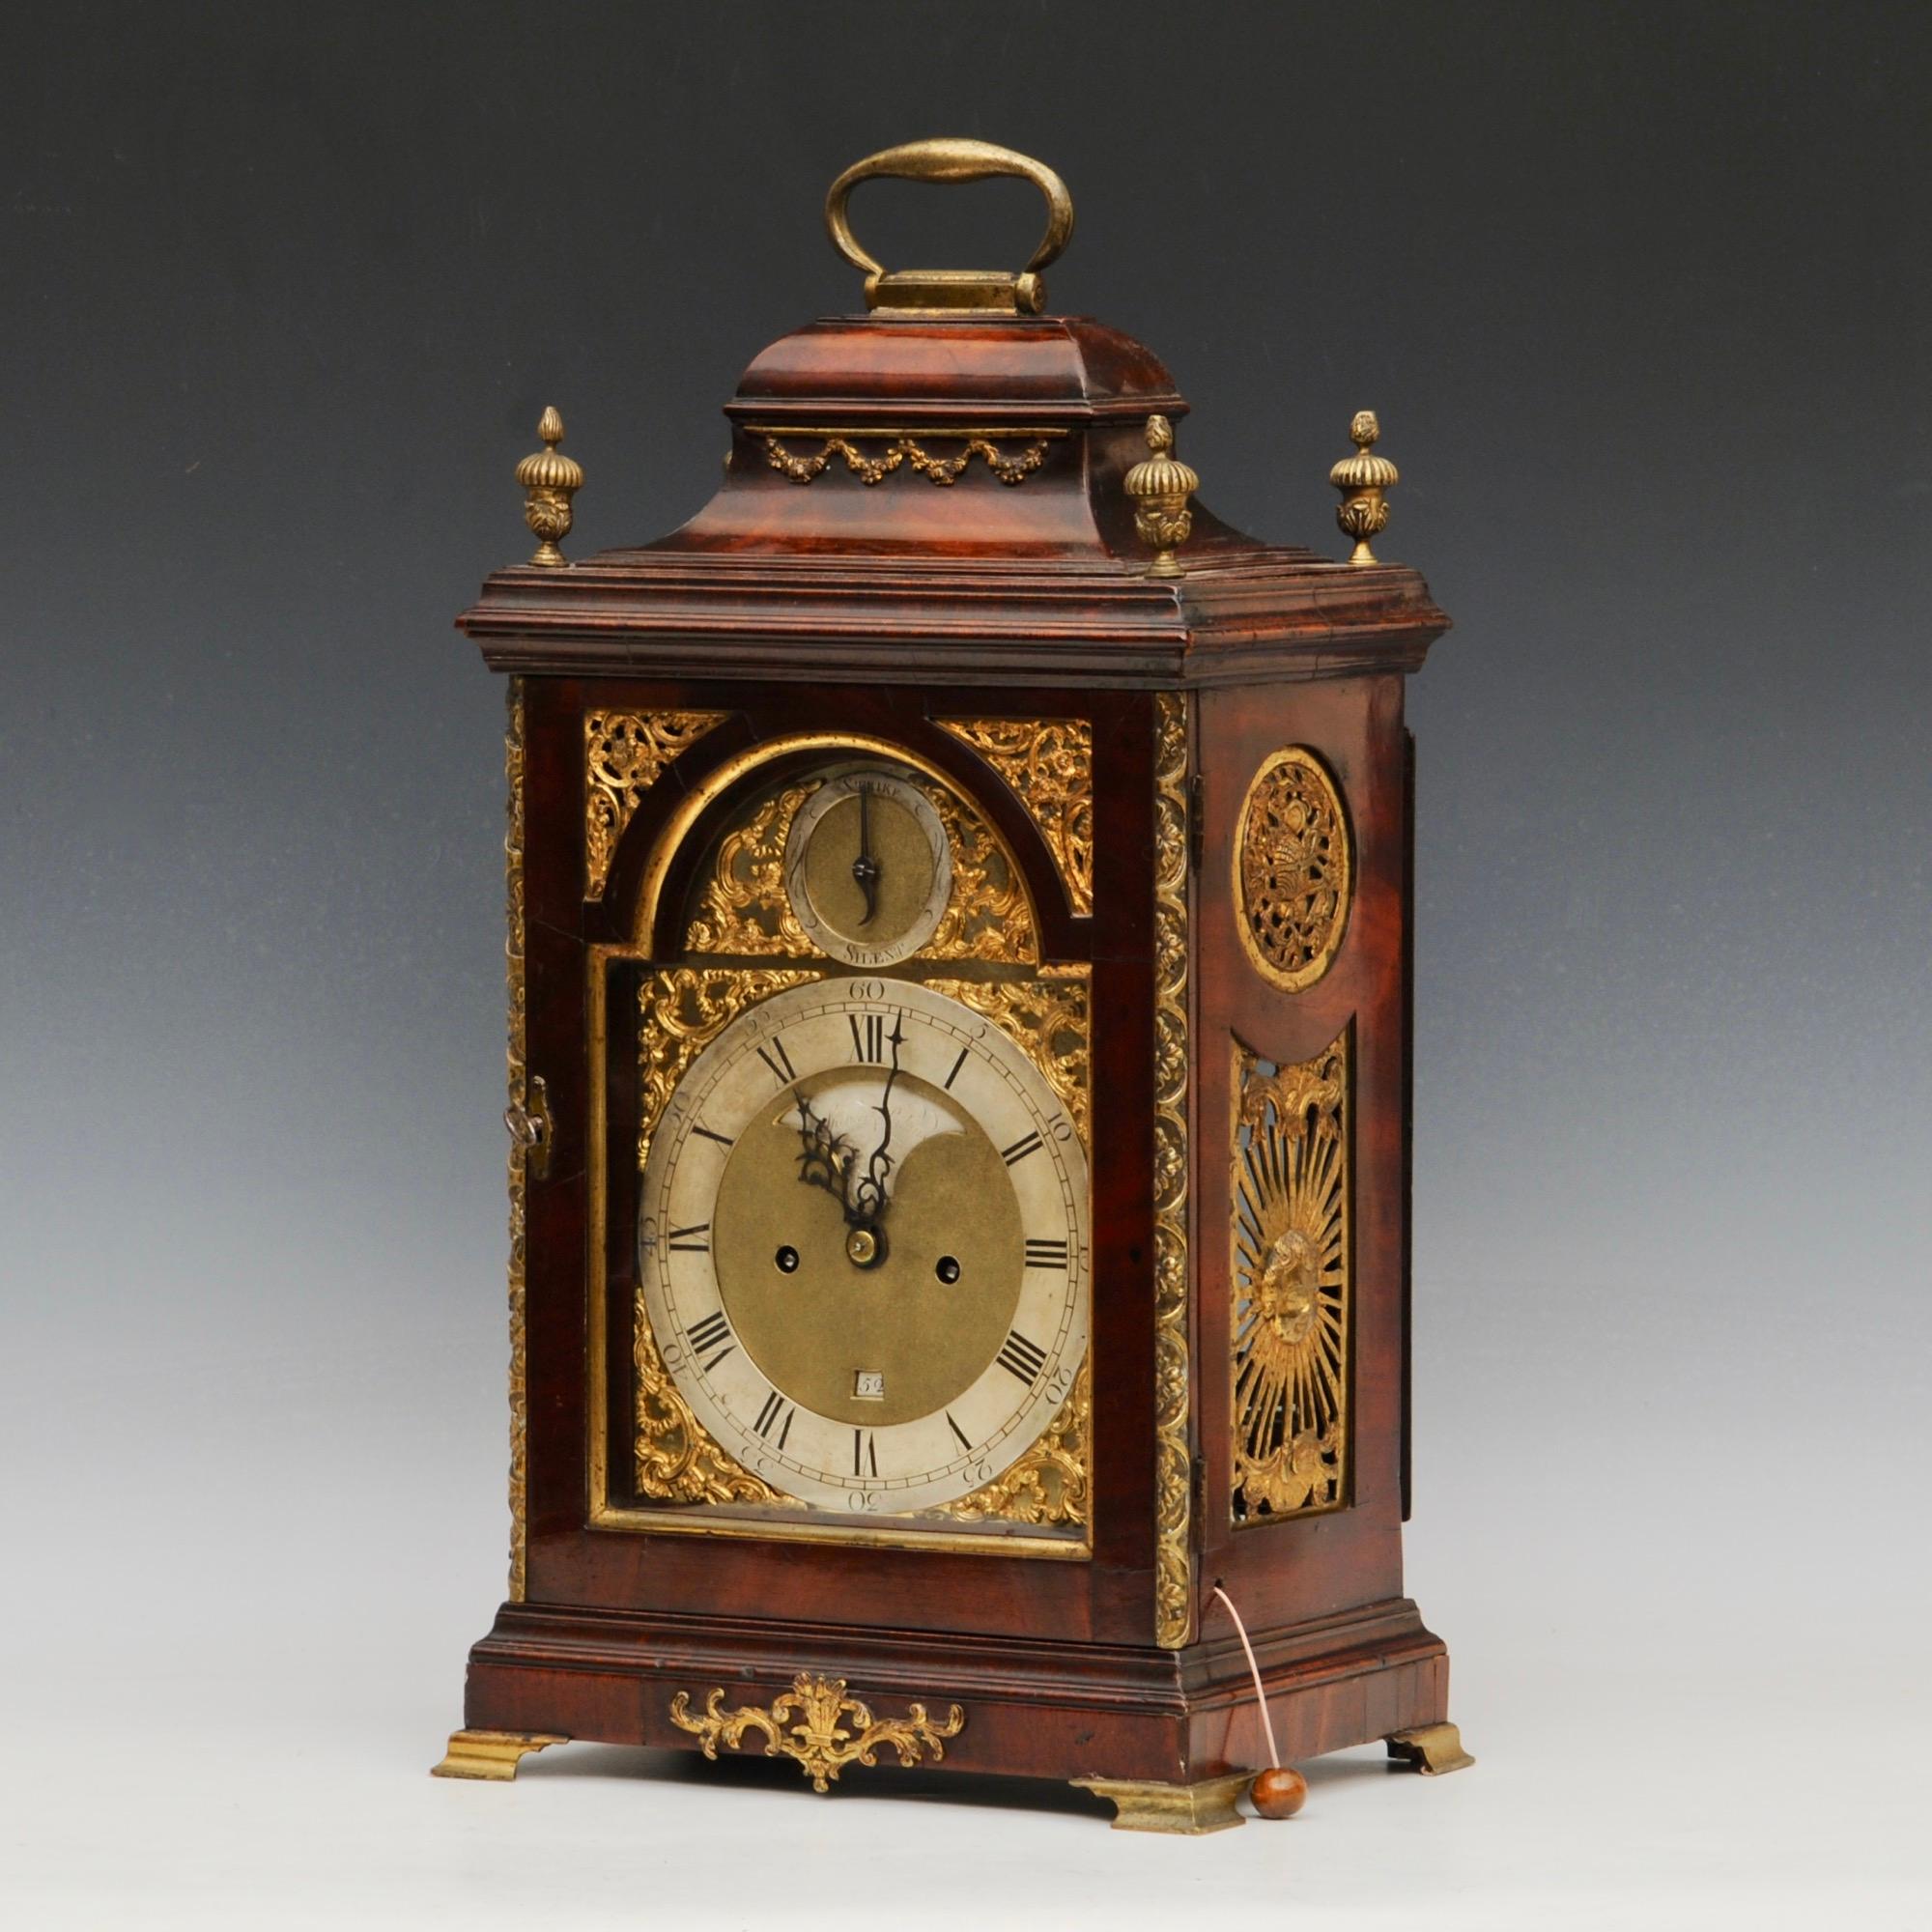 A fine example of a George III period mahogany eight day bracket clock with full brass dial by Spencer and Perkins, London.
The original verge movement with well engraved back plate and pull repeat. The flame mahogany case with good ormolu